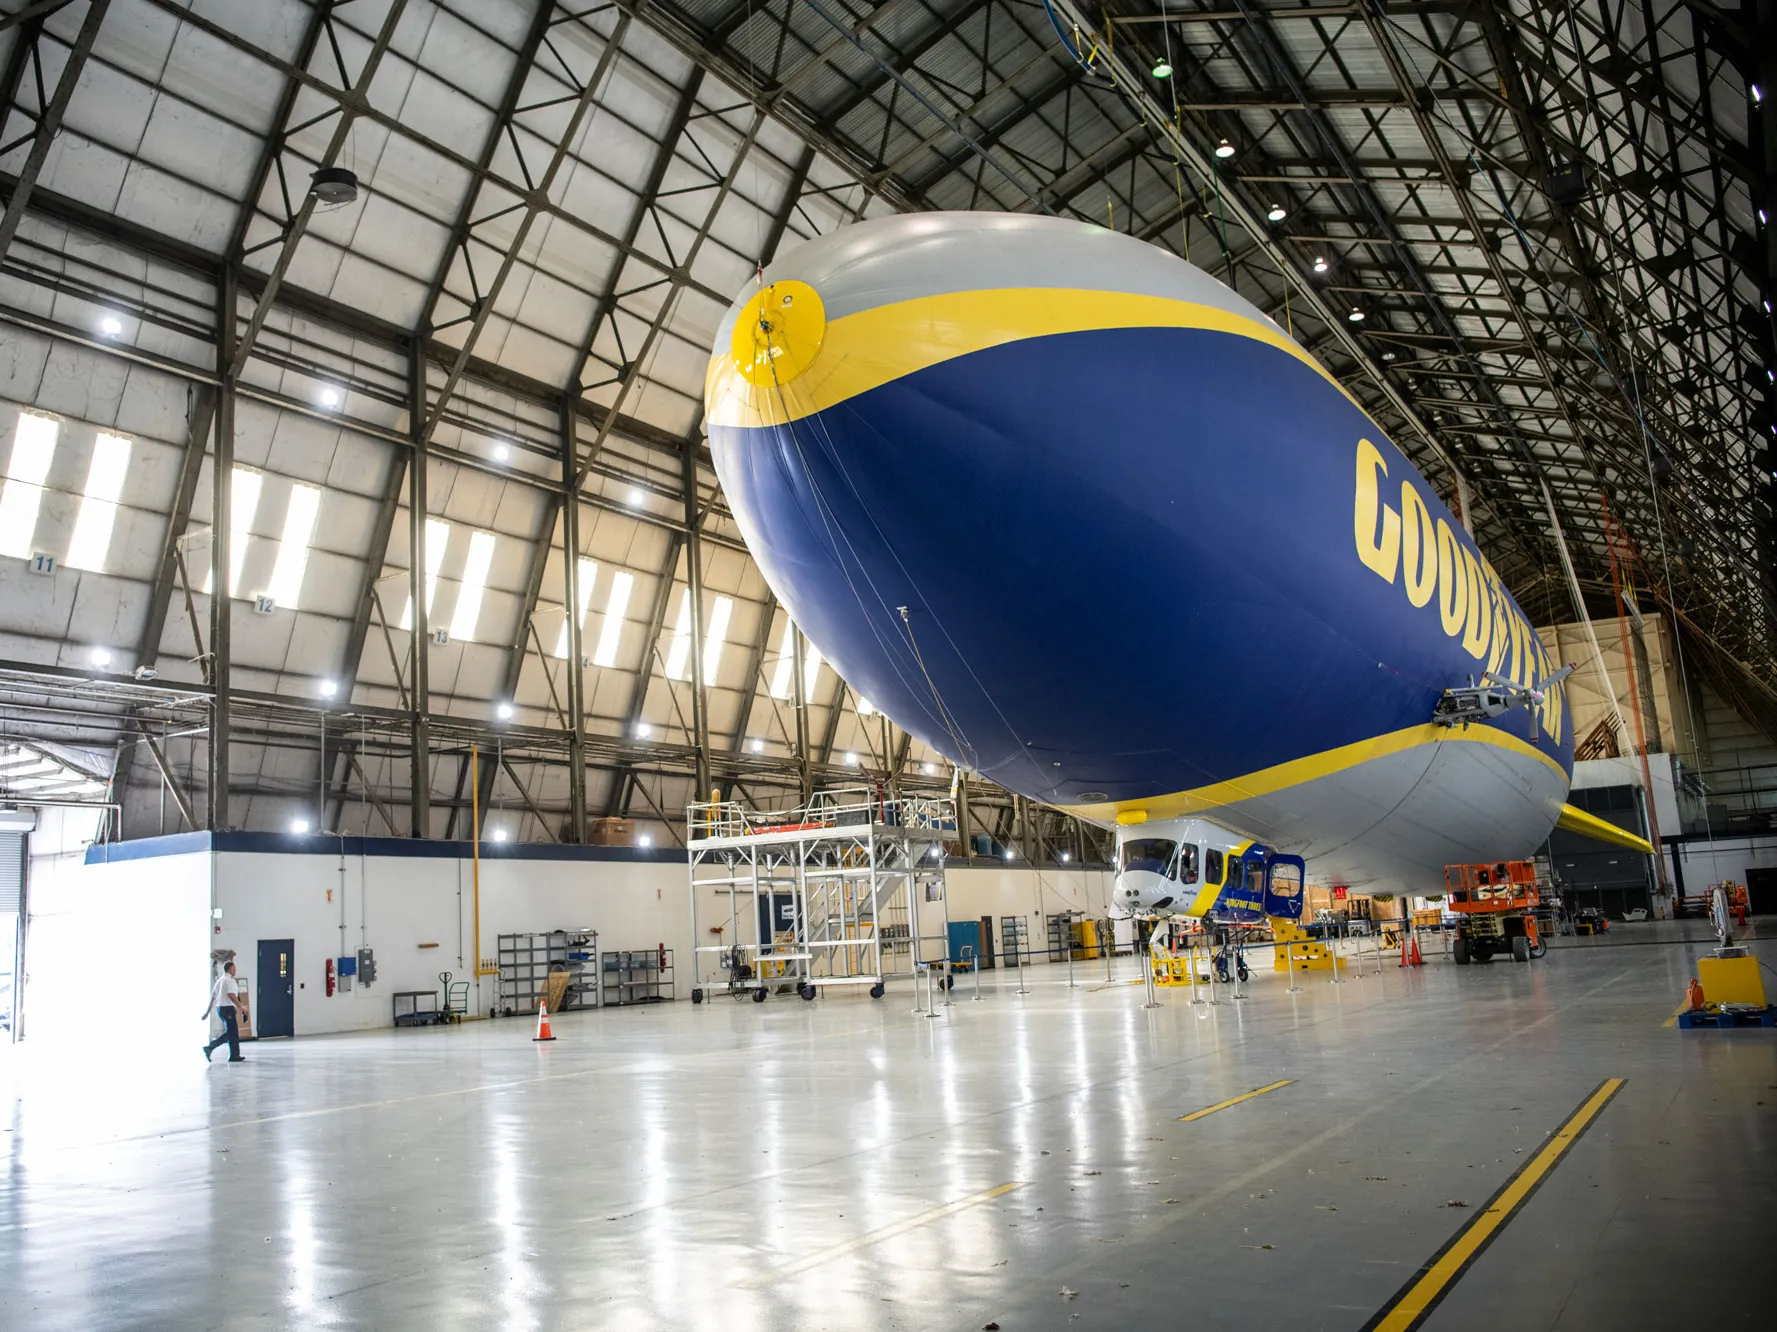 In a hangar with metal scaffolding supporting the 6-sided roof, a Goodyear blimp floats, looking a bit like a stamen inside a tulip. The floor is so clean, lights shine off it. 